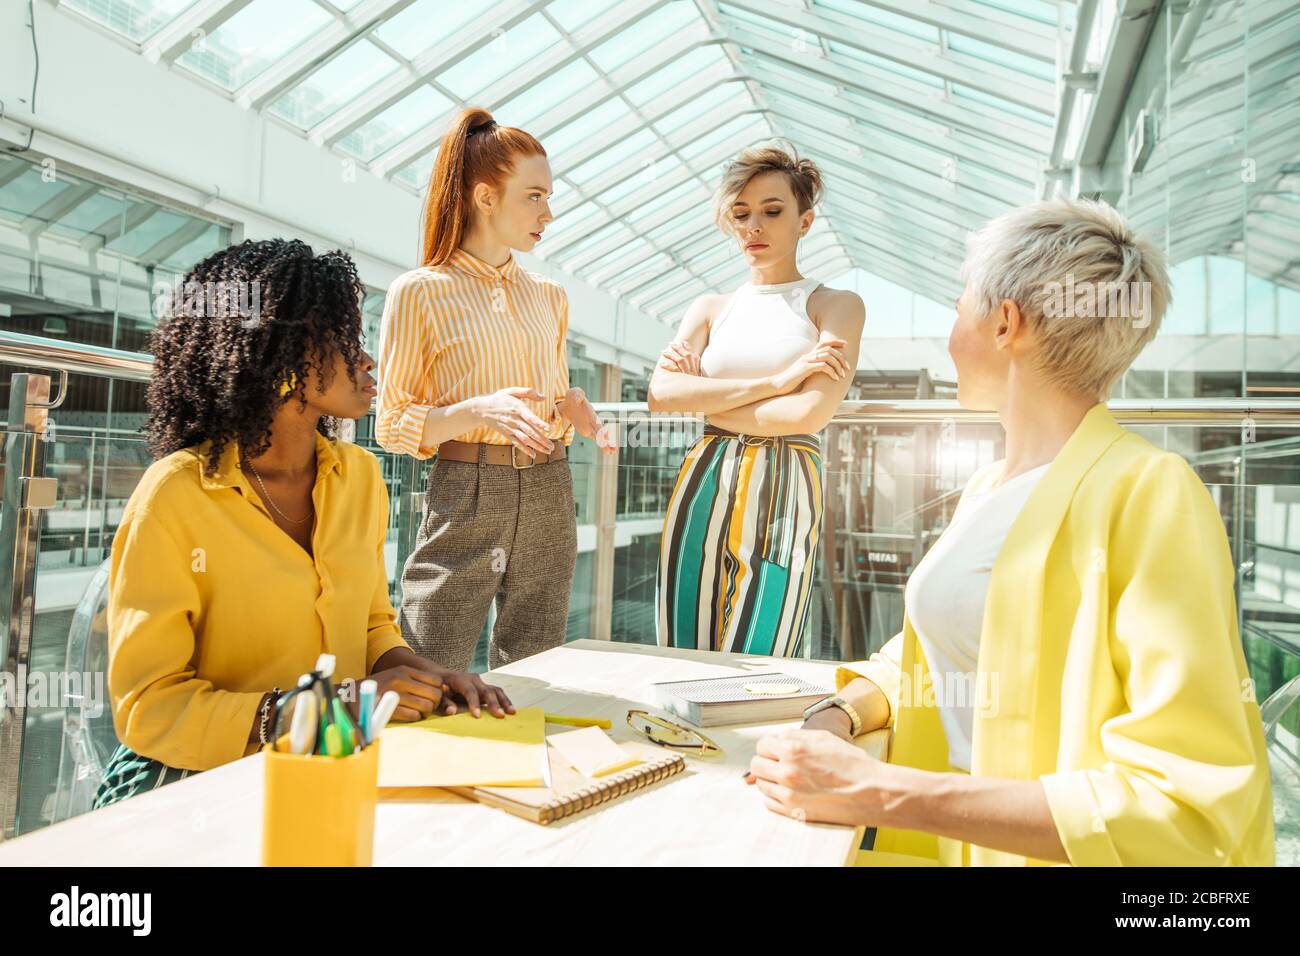 three women scolding their colleague. women tell of a new employee for her mistake, lateness. close up photo Stock Photo